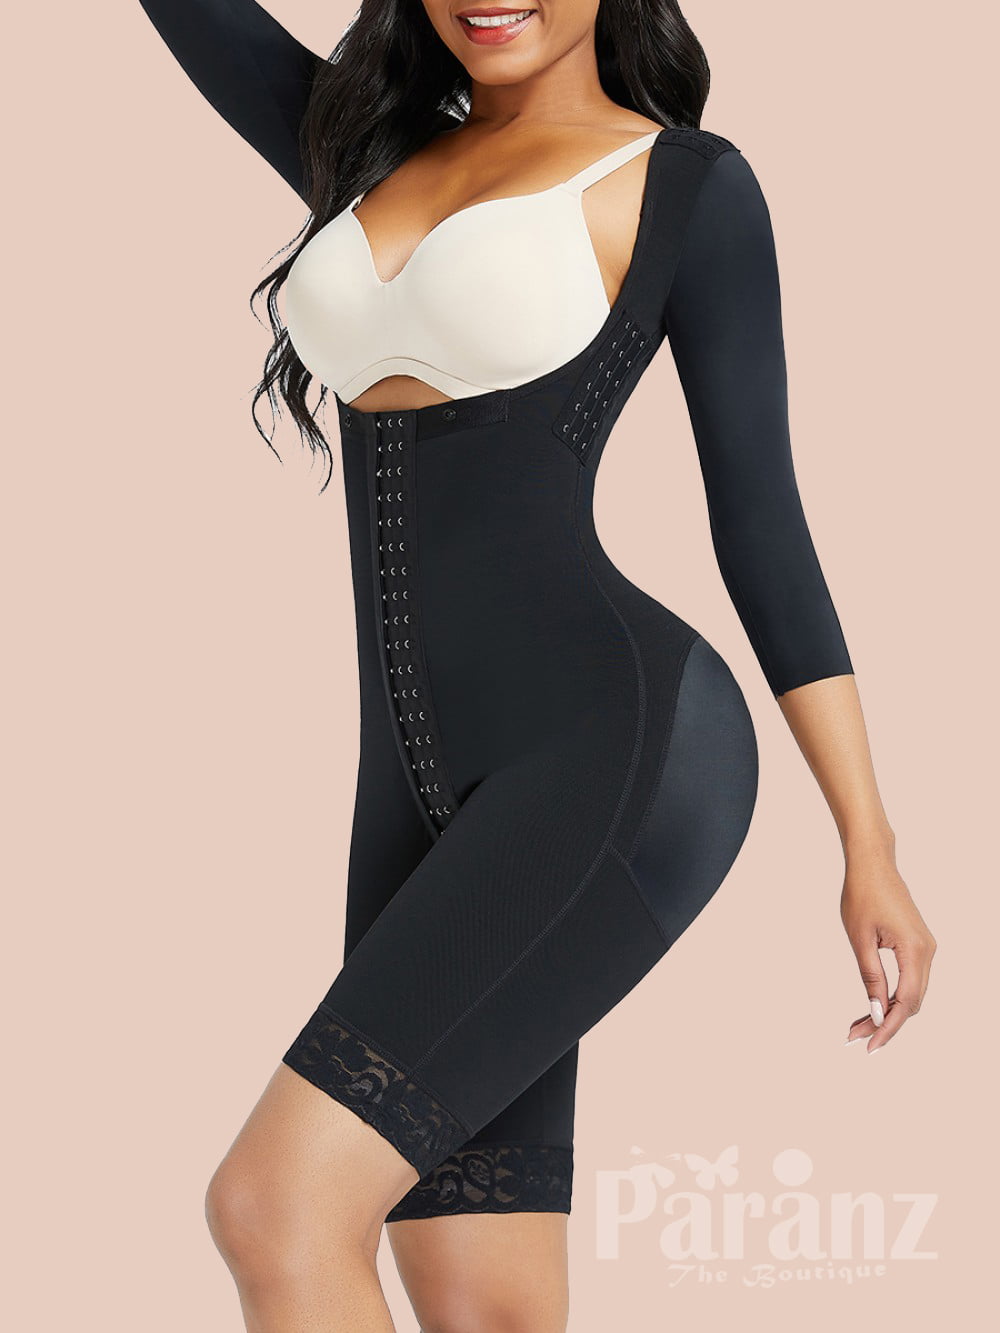 https://paranz.com/wp-content/uploads/2021/08/Black-Lace-Trim-Hourglass-Body-Shaper-With-Sleeves-Curve-Shapers.jpg